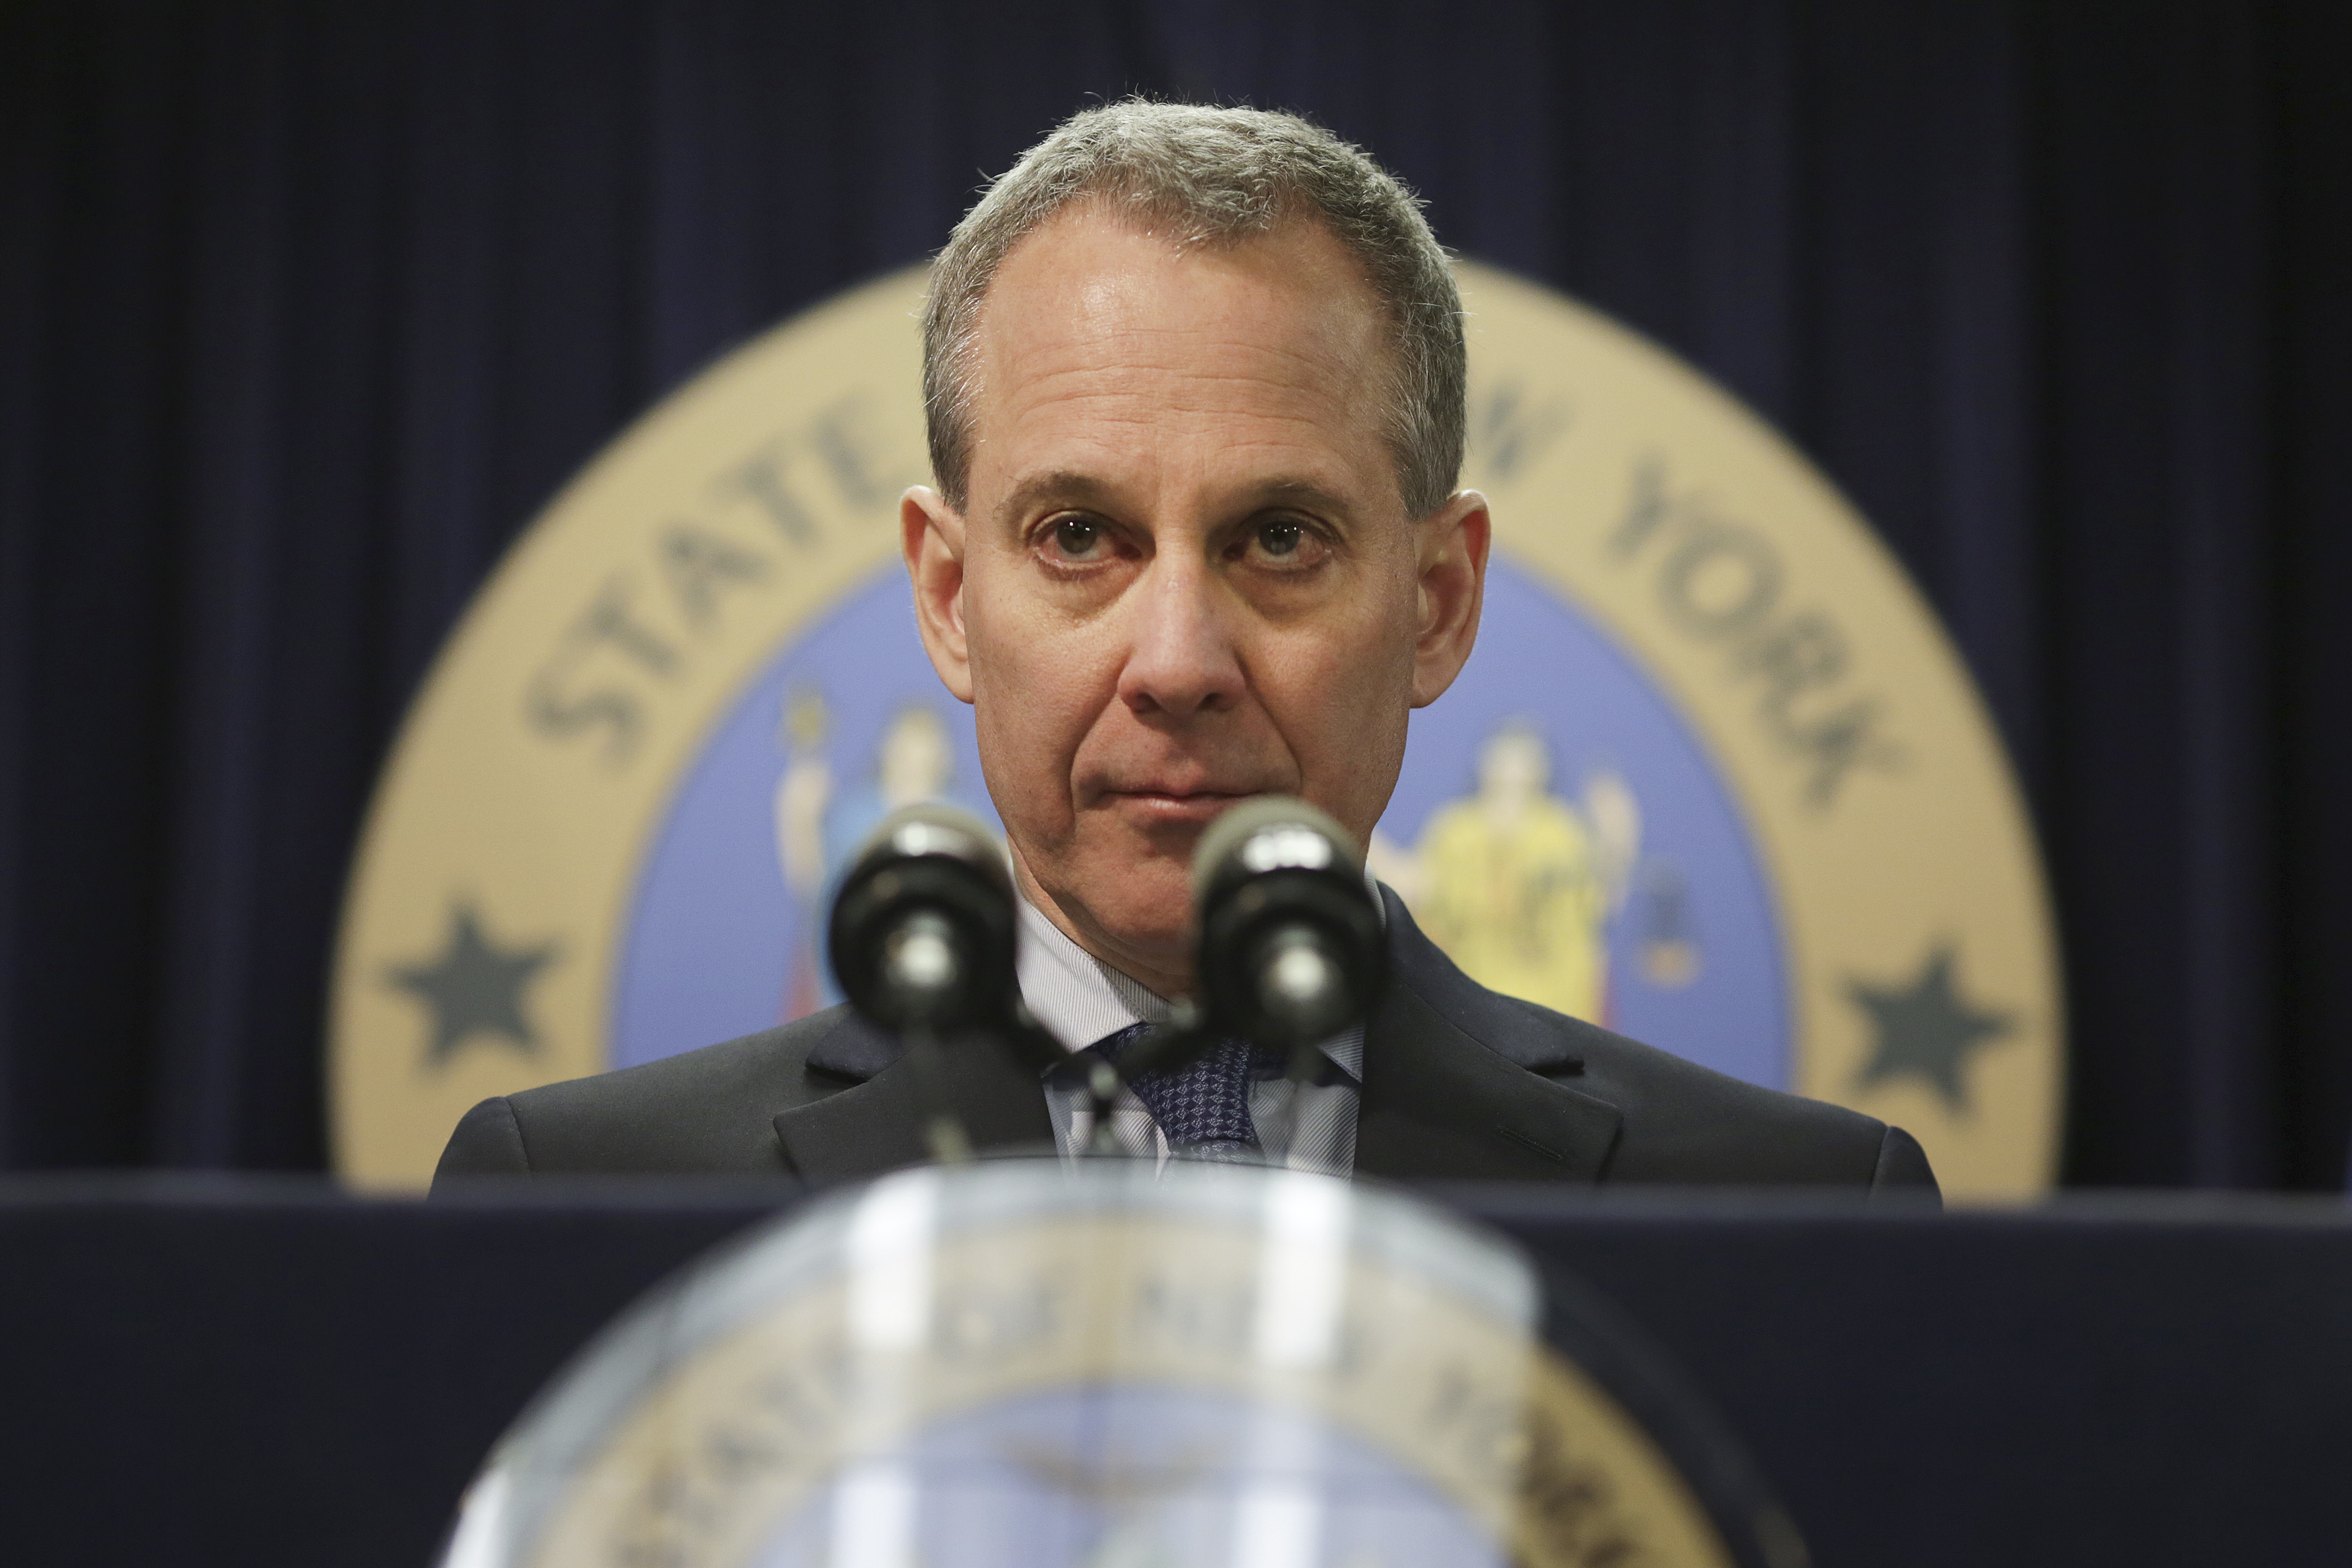 Former NY attorney general Eric Schneiderman stands behind a podium.